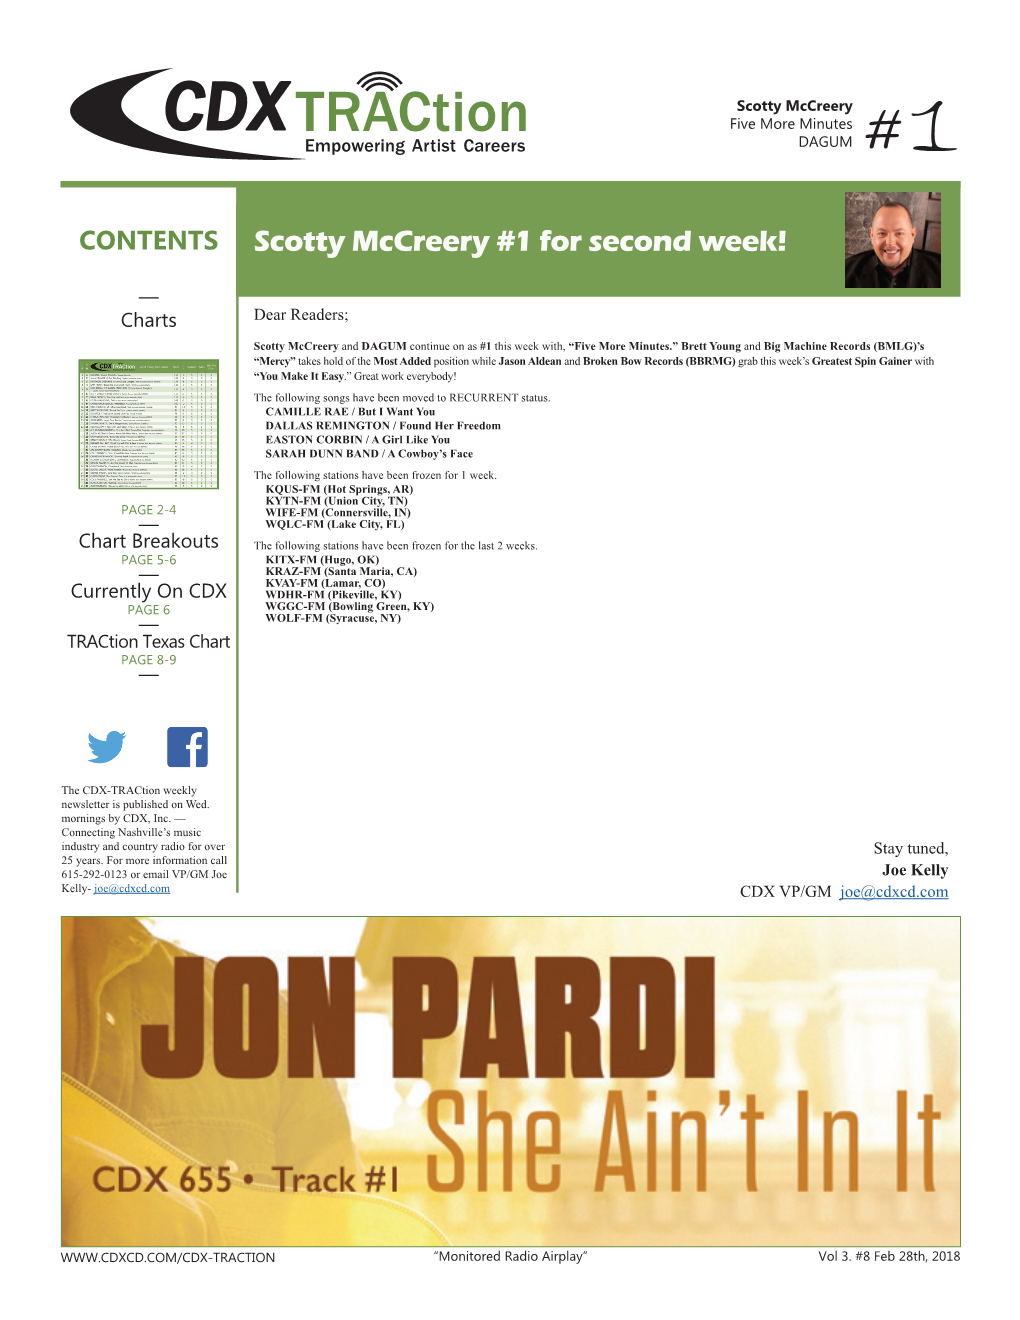 Scotty Mccreery #1 for Second Week!